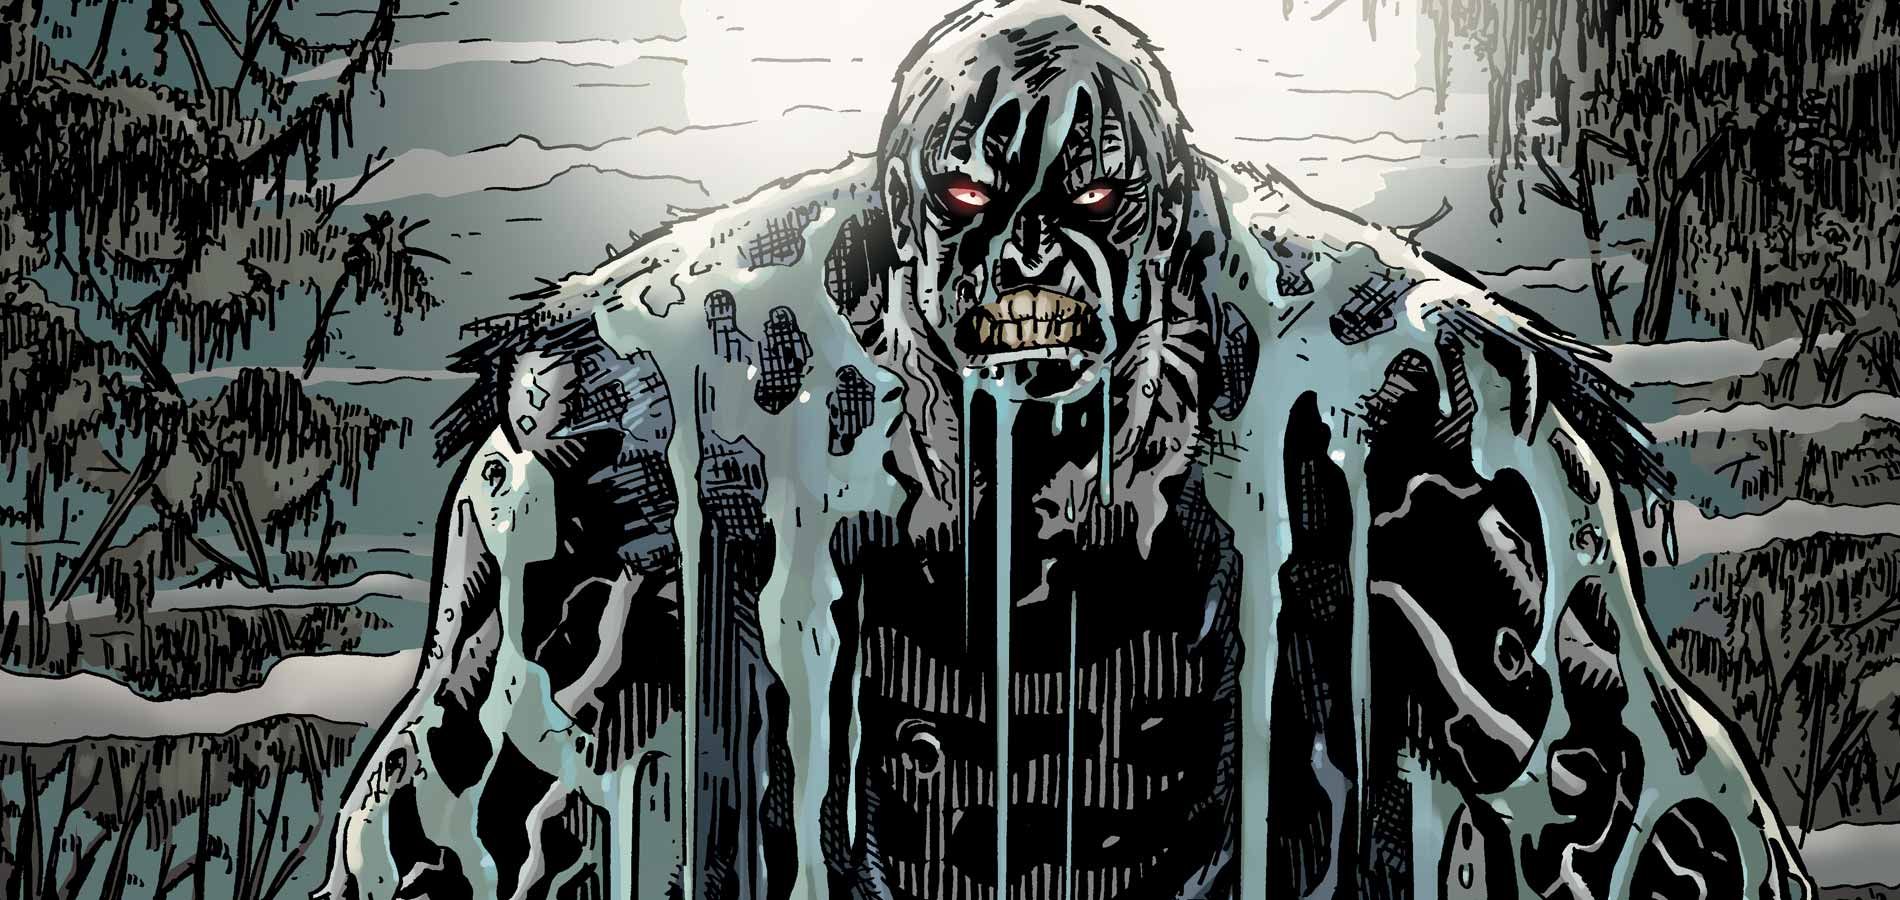 Solomon Grundy rises from Slaughter Swamp in DC Comics.